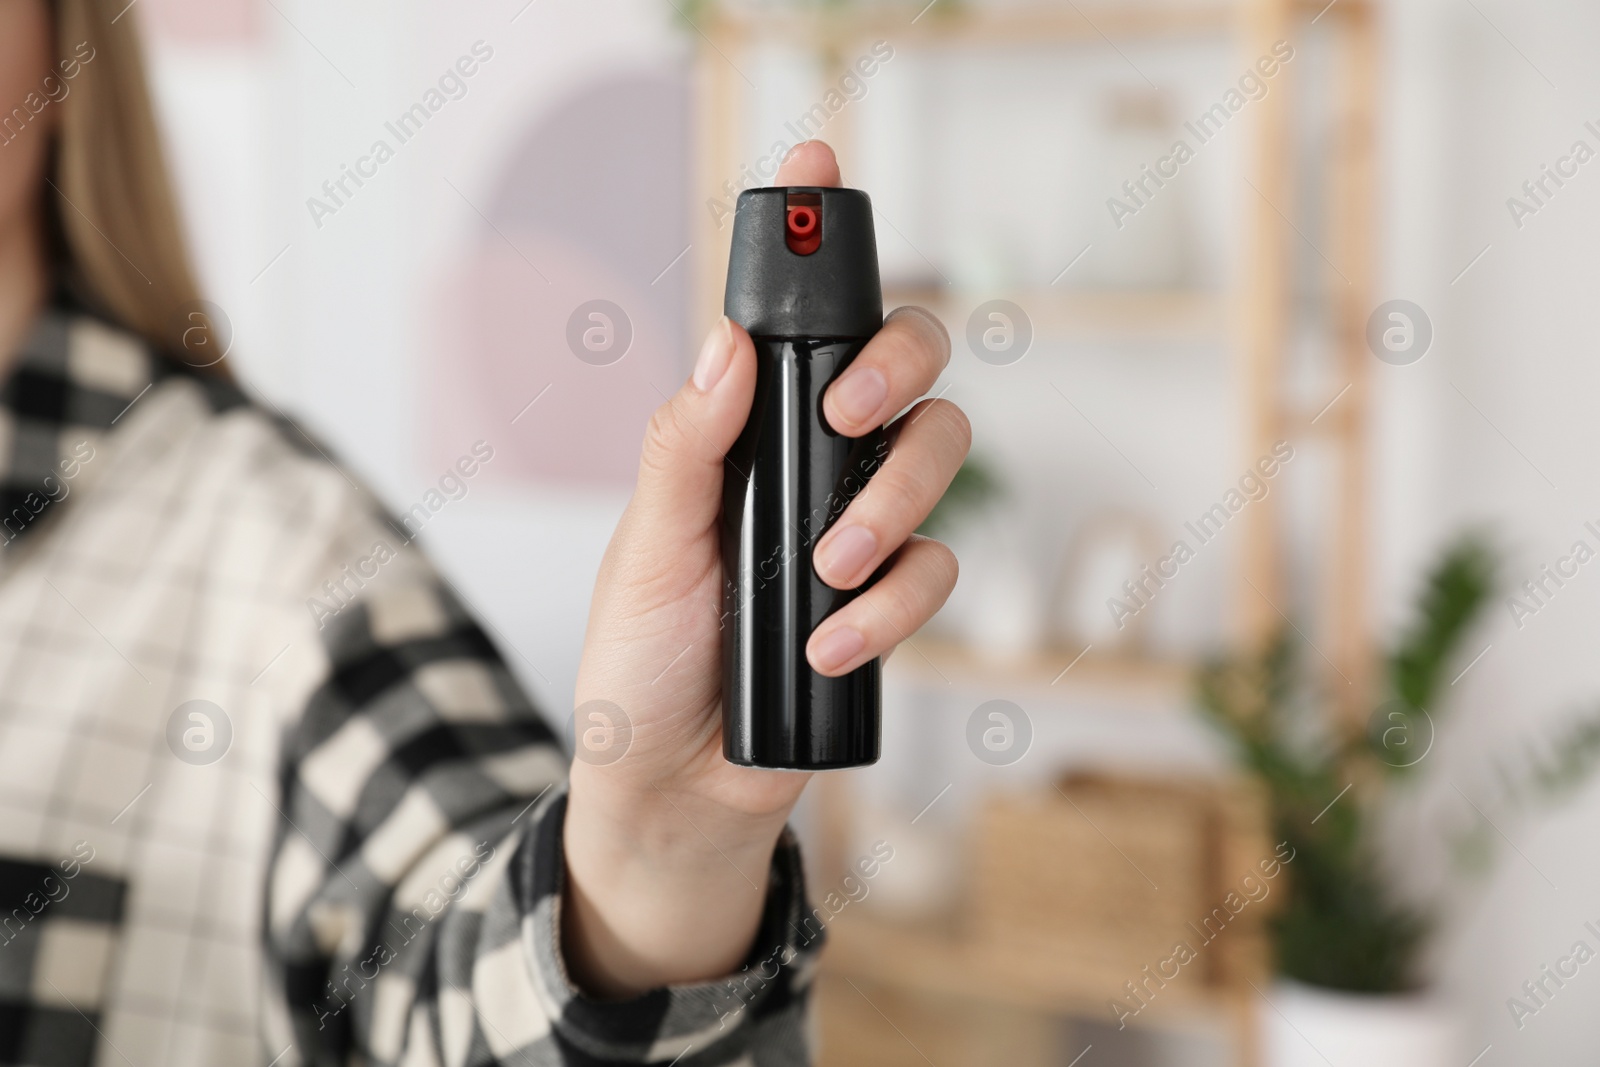 Photo of Woman using pepper spray indoors, closeup view